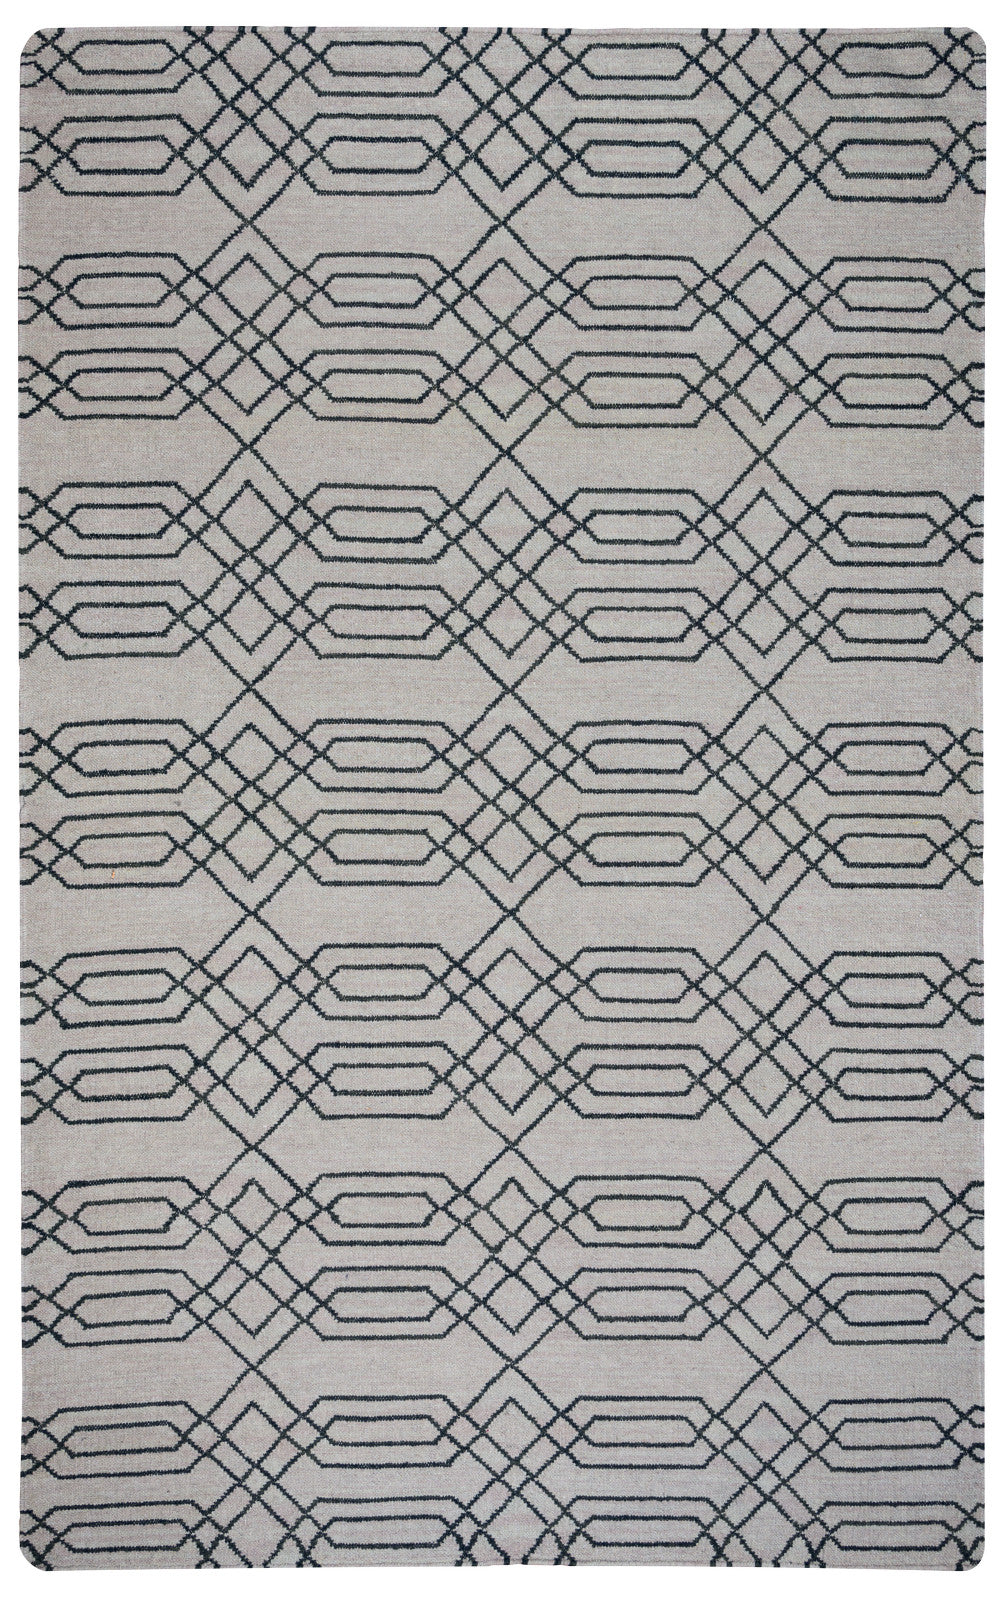 Rizzy Swing SG0381 Gray Area Rug